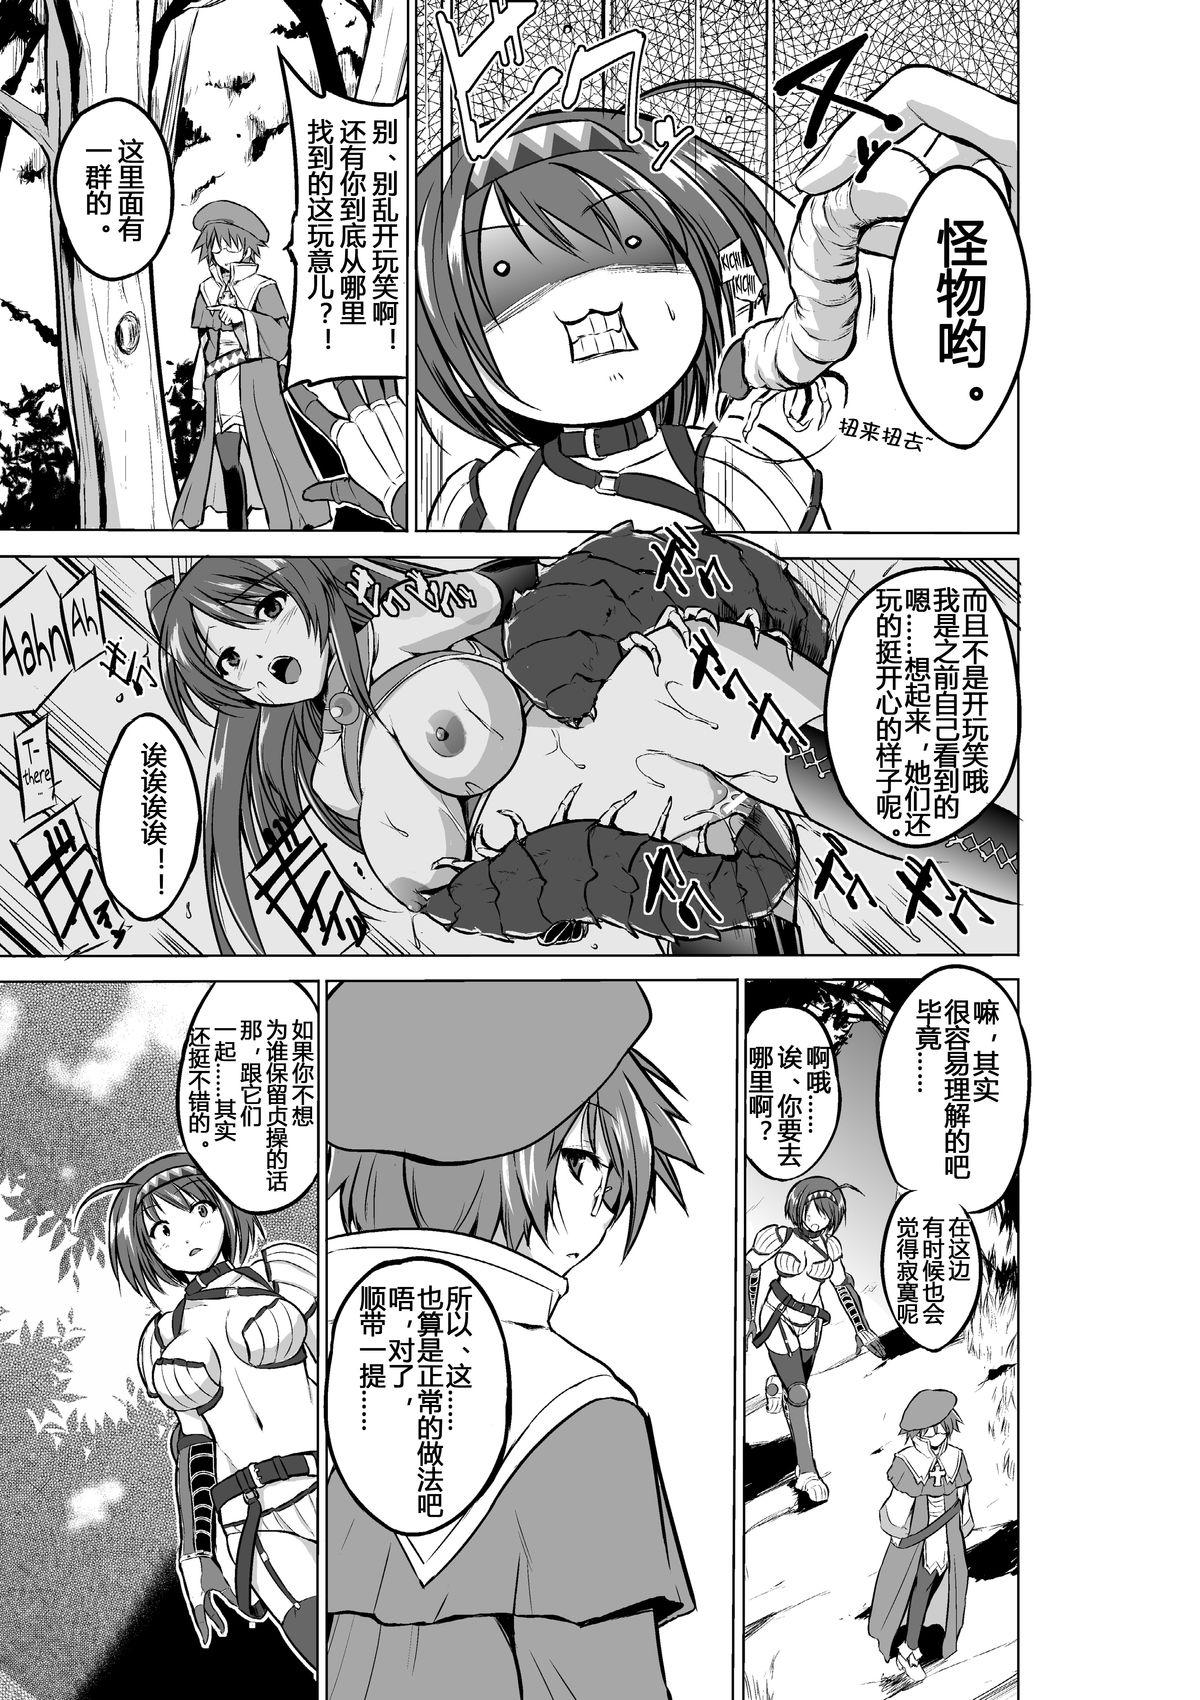 Hard Fuck Dungeon Travelers - Chie no Himegoto - Toheart2 Esposa - Page 5